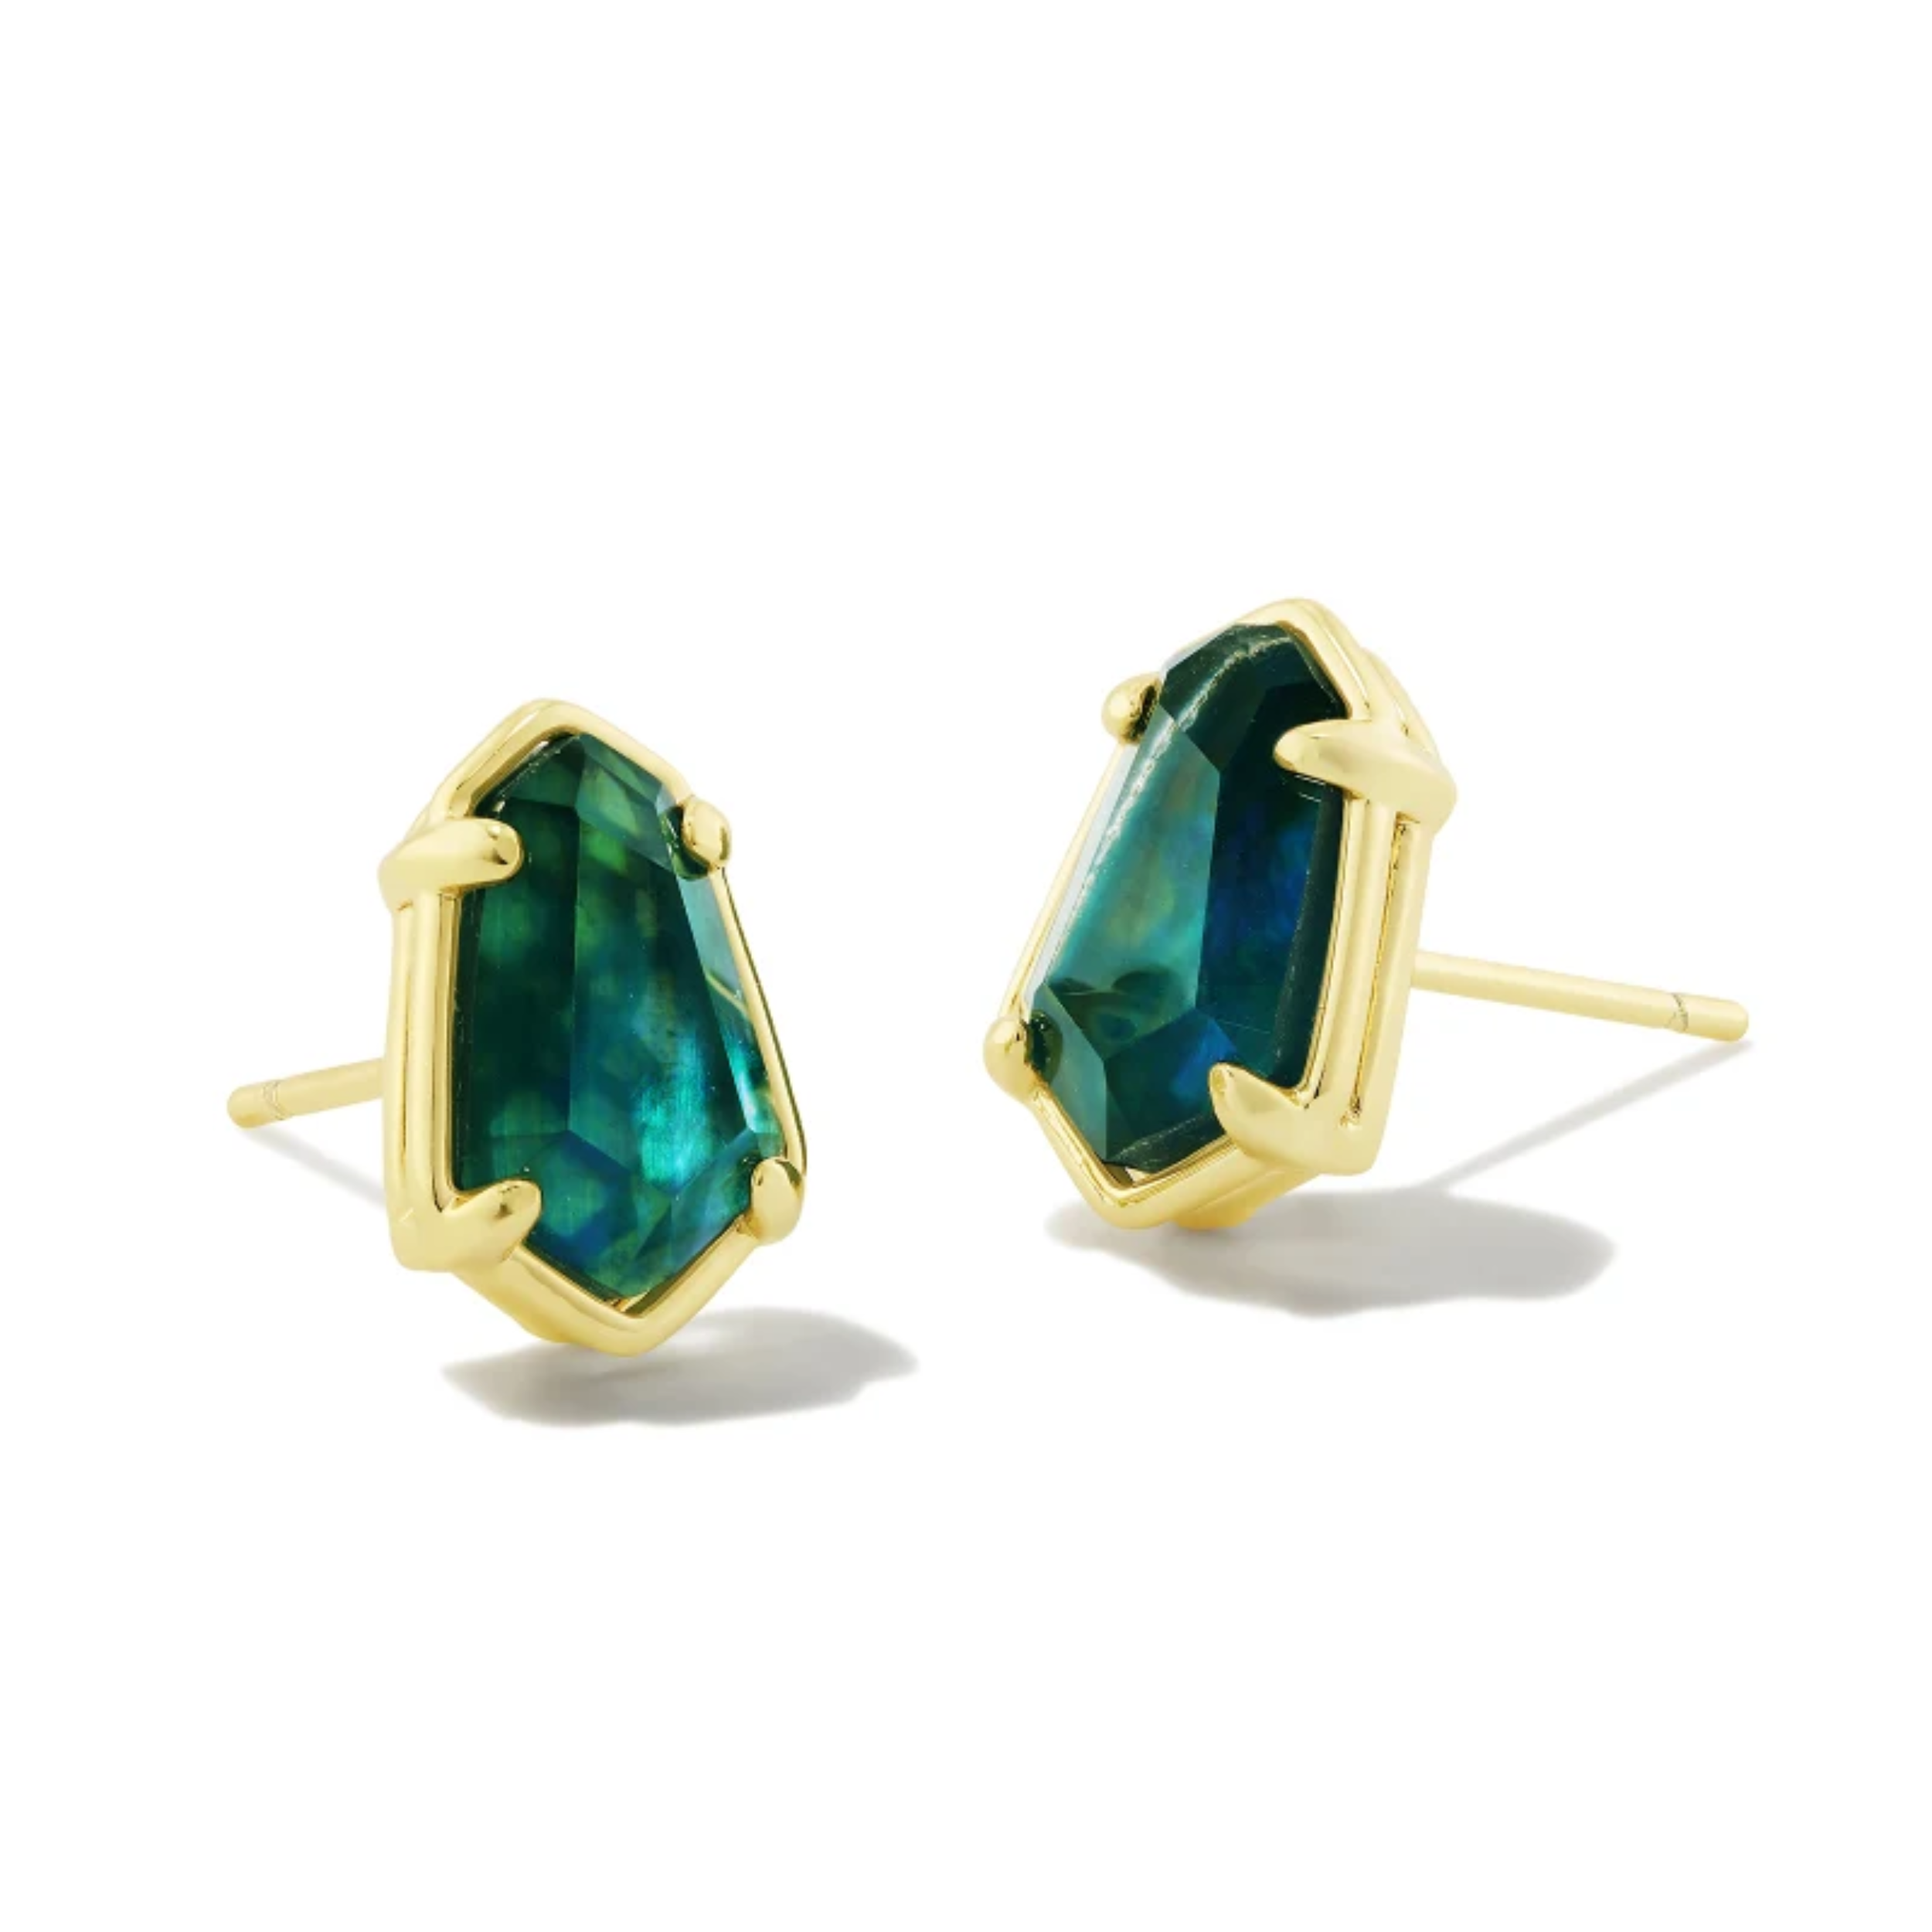 These Alexandria Gold Stud Earrings in Teal Green illusion by Kendra Scott are pictured on a white background.